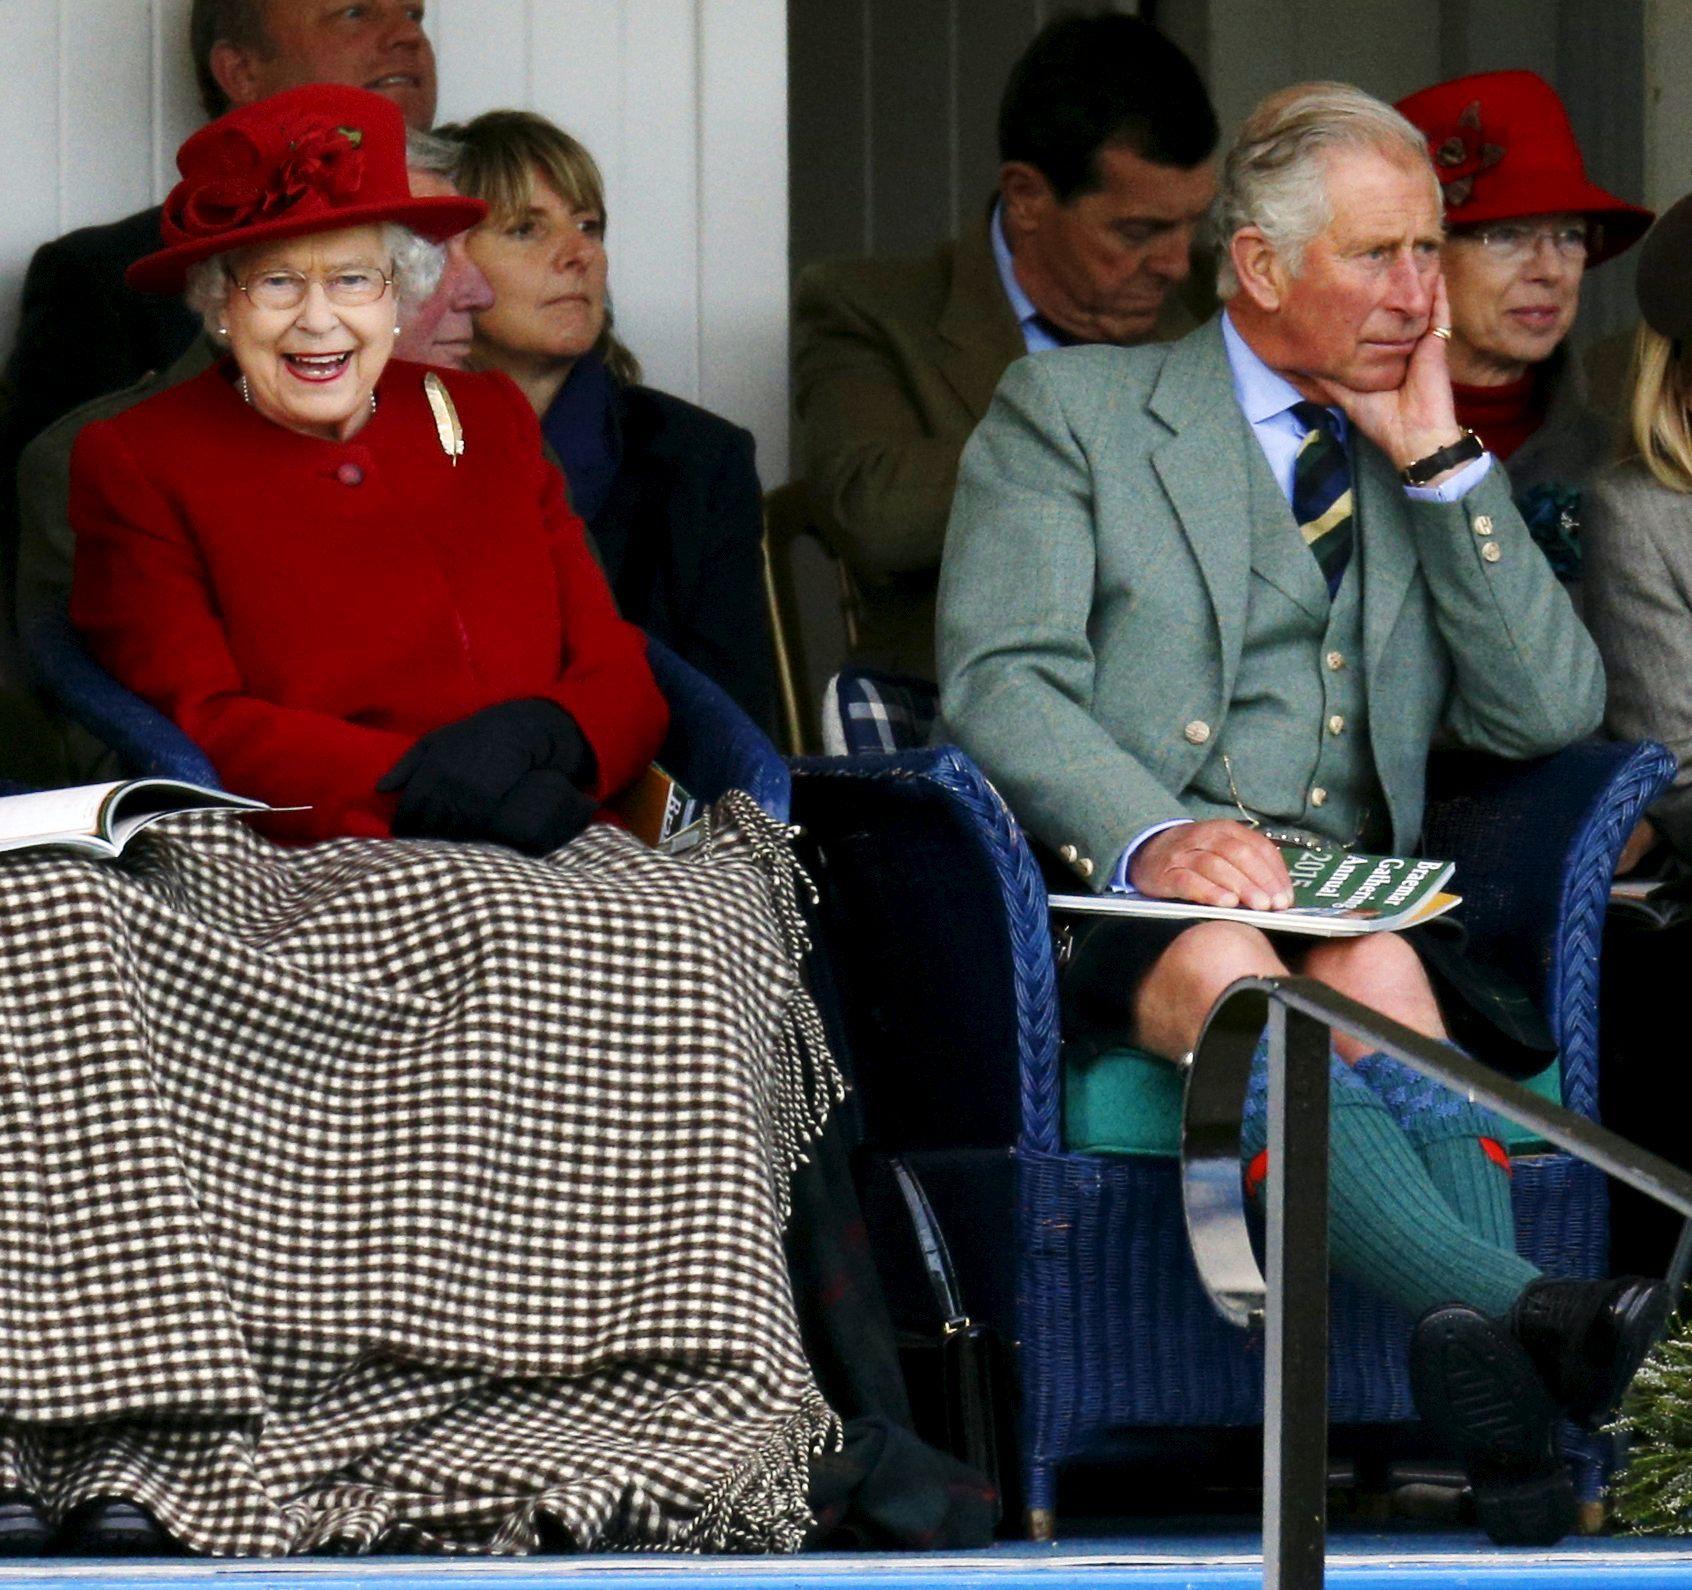 Britain's Queen Elizabeth and Prince Charles watch the sack race at the annual Braemar Highland Gathering in Braemar, Scotland, Britain September 5, 2015. Queen Elizabeth will become Britain's longest-ever serving monarch on September 9. REUTERS/Russell Cheyne